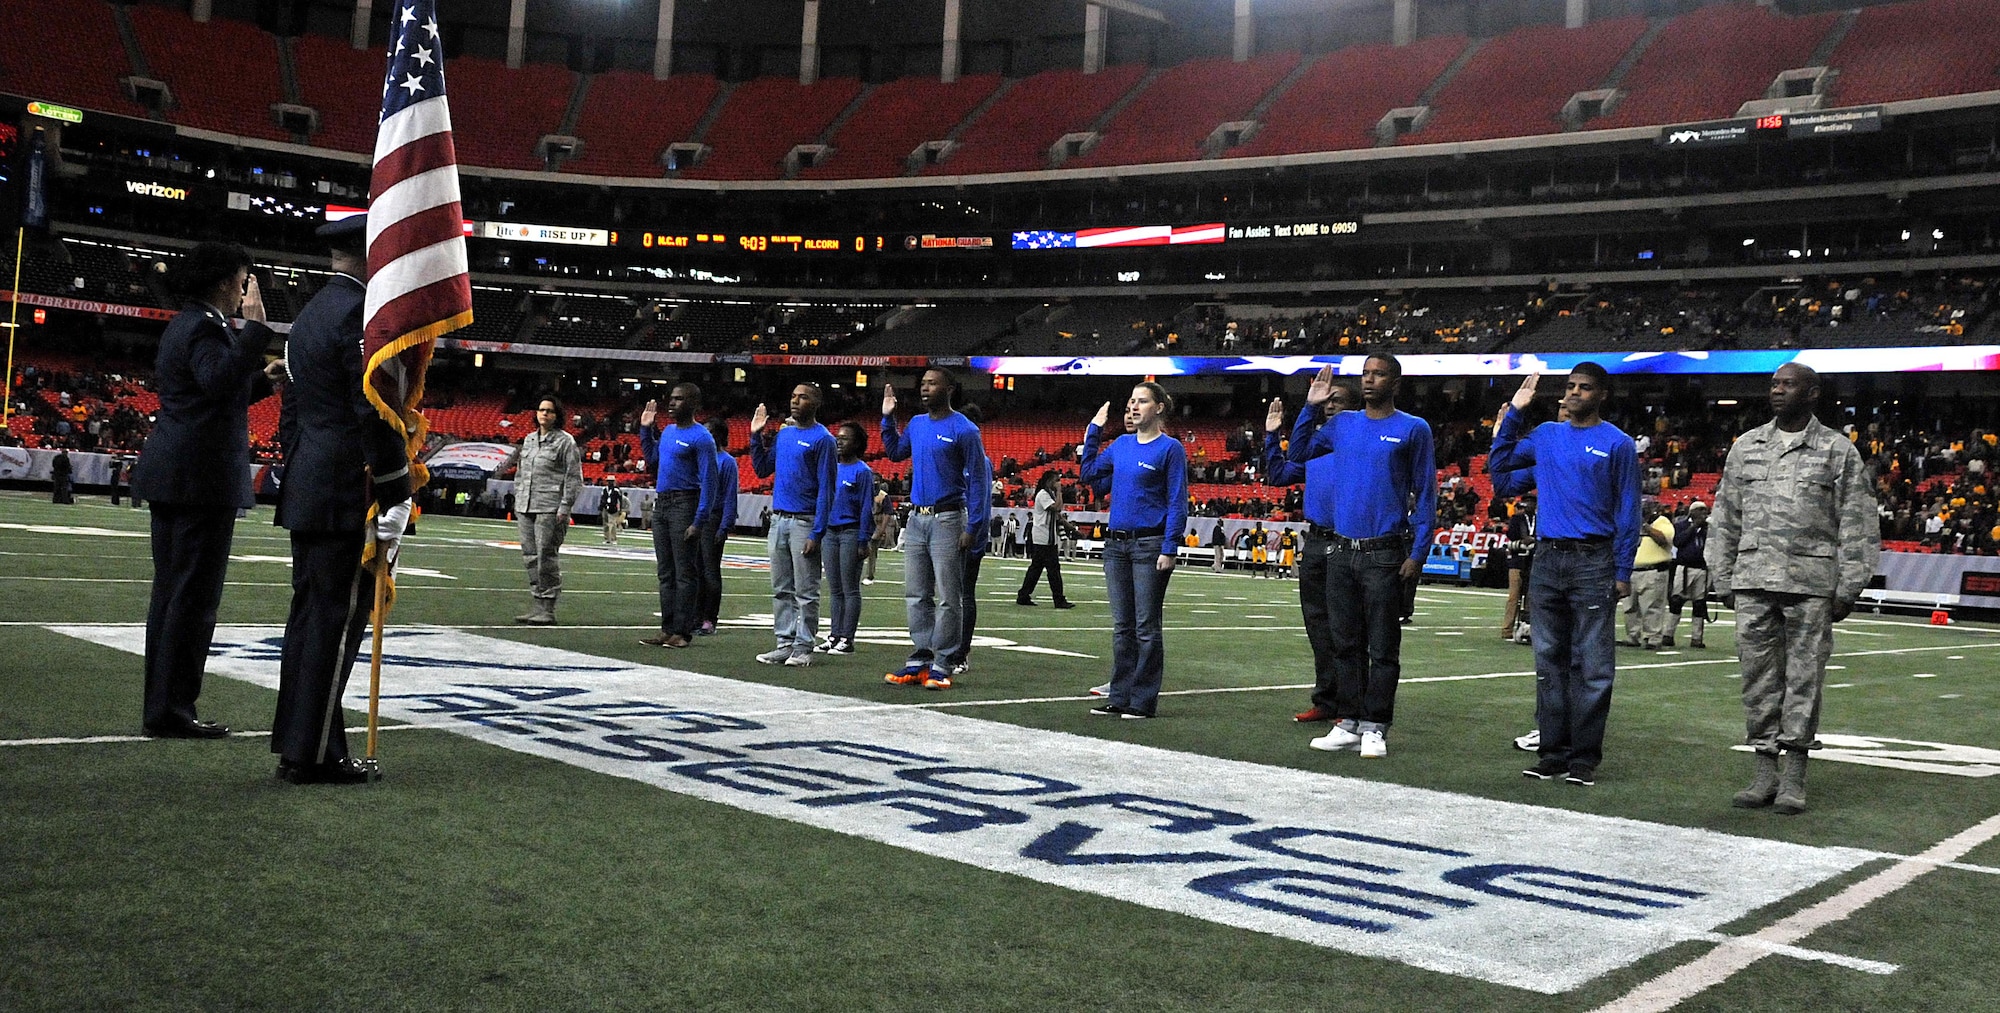 Maj. Gen. Stayce Harris, Commander, 22nd Air Force, swears in a group of airmen recruits at the inaugural Air Force Reserve Celebration Bowl Dec. 19 at the Georgia Dome in Atlanta. These recruits are now officially enlisted in the Air Force Reserve and now await orders to attend Basic Military Training at Joint Base San Antonio Lackland in San Antonio, Texas. (U.S. Air Force photo/Senior Airman Andrew Park)